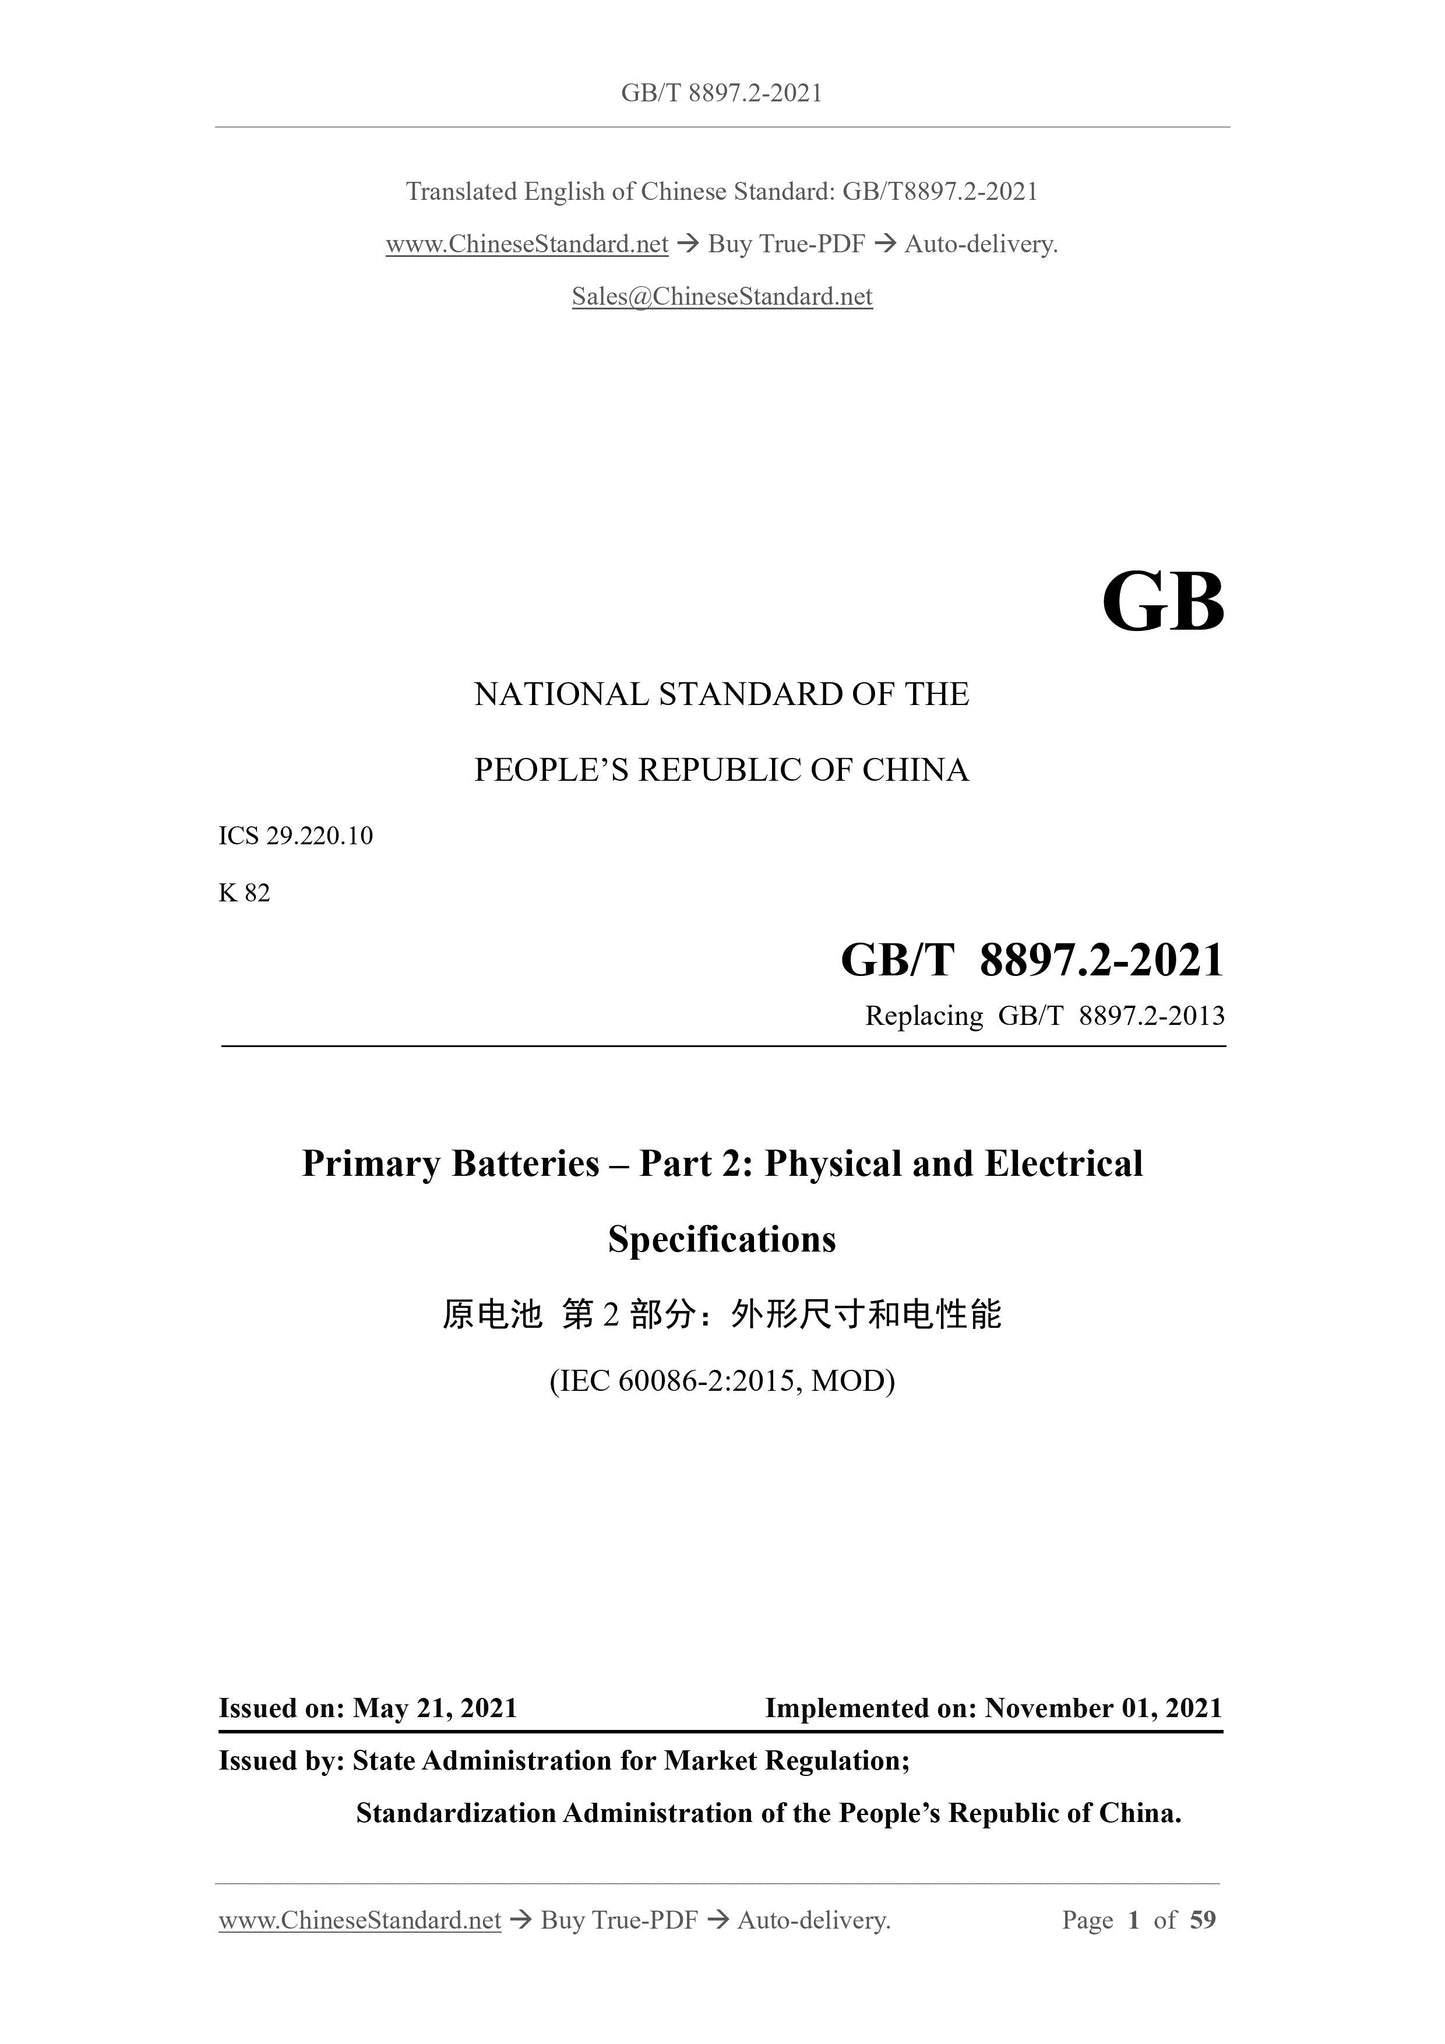 GB/T 8897.2-2021 Page 1